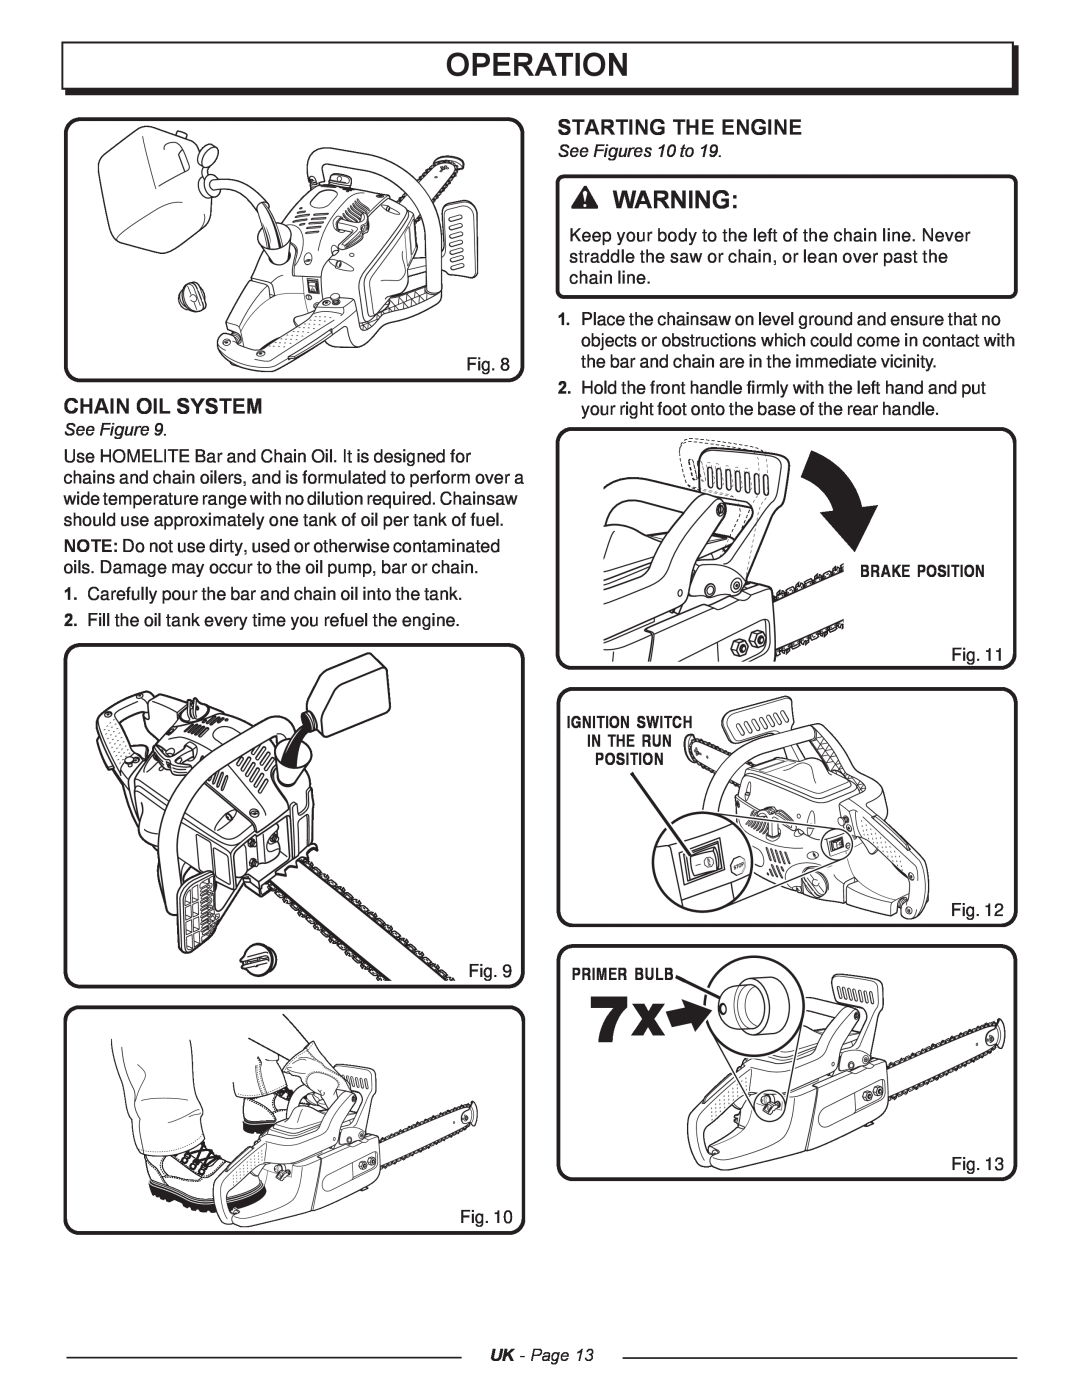 Homelite UT74121A manual Chain Oil System, Starting The Engine, See Figures 10 to, Brake Position, Primer Bulb, Operation 